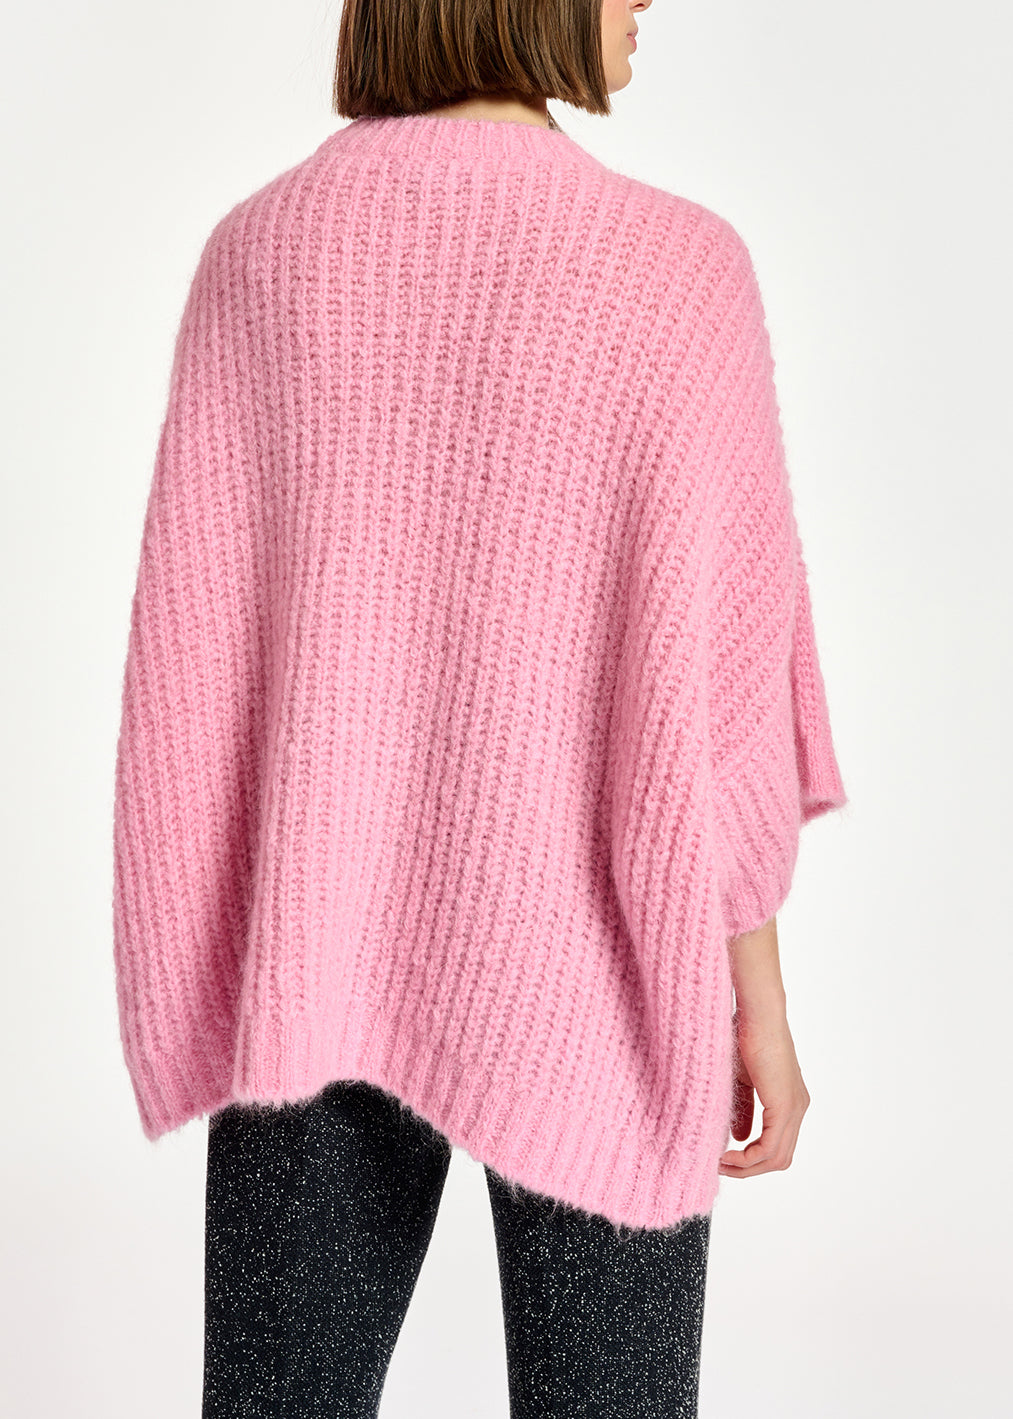 Knit Sweater With Intarsia Detail Pale Pink Perfect Moment - Babyshop